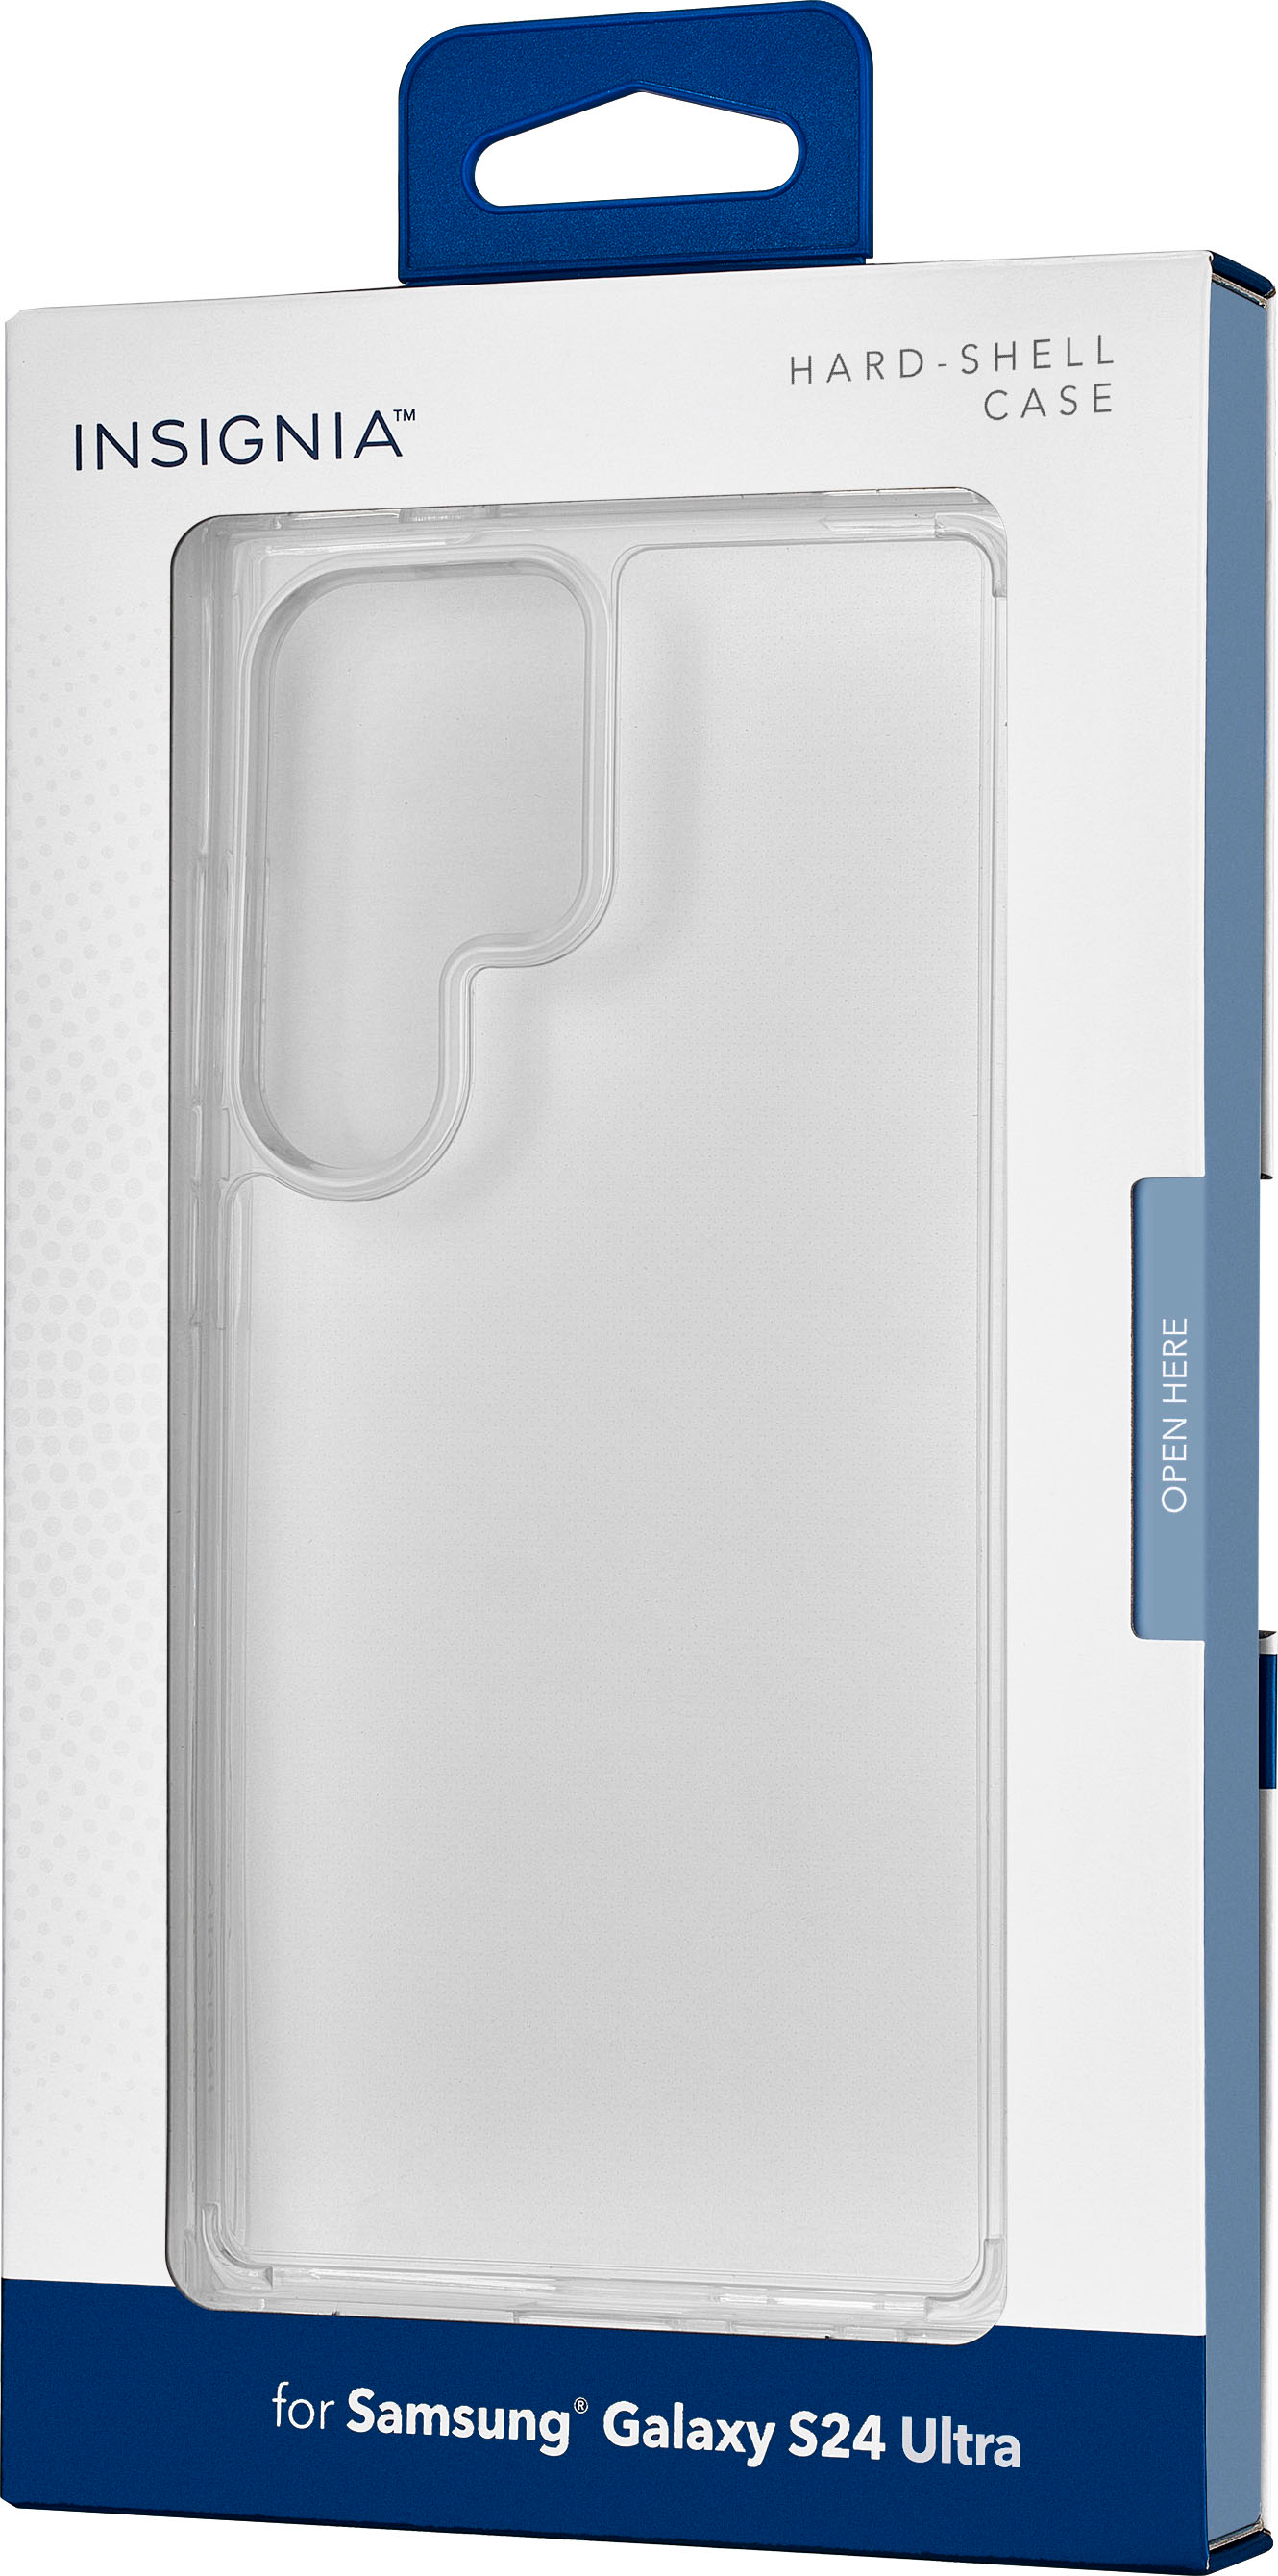 Insignia™ Hard-Shell Case for Samsung Galaxy S24 Ultra Clear NS-24UHCC -  Best Buy